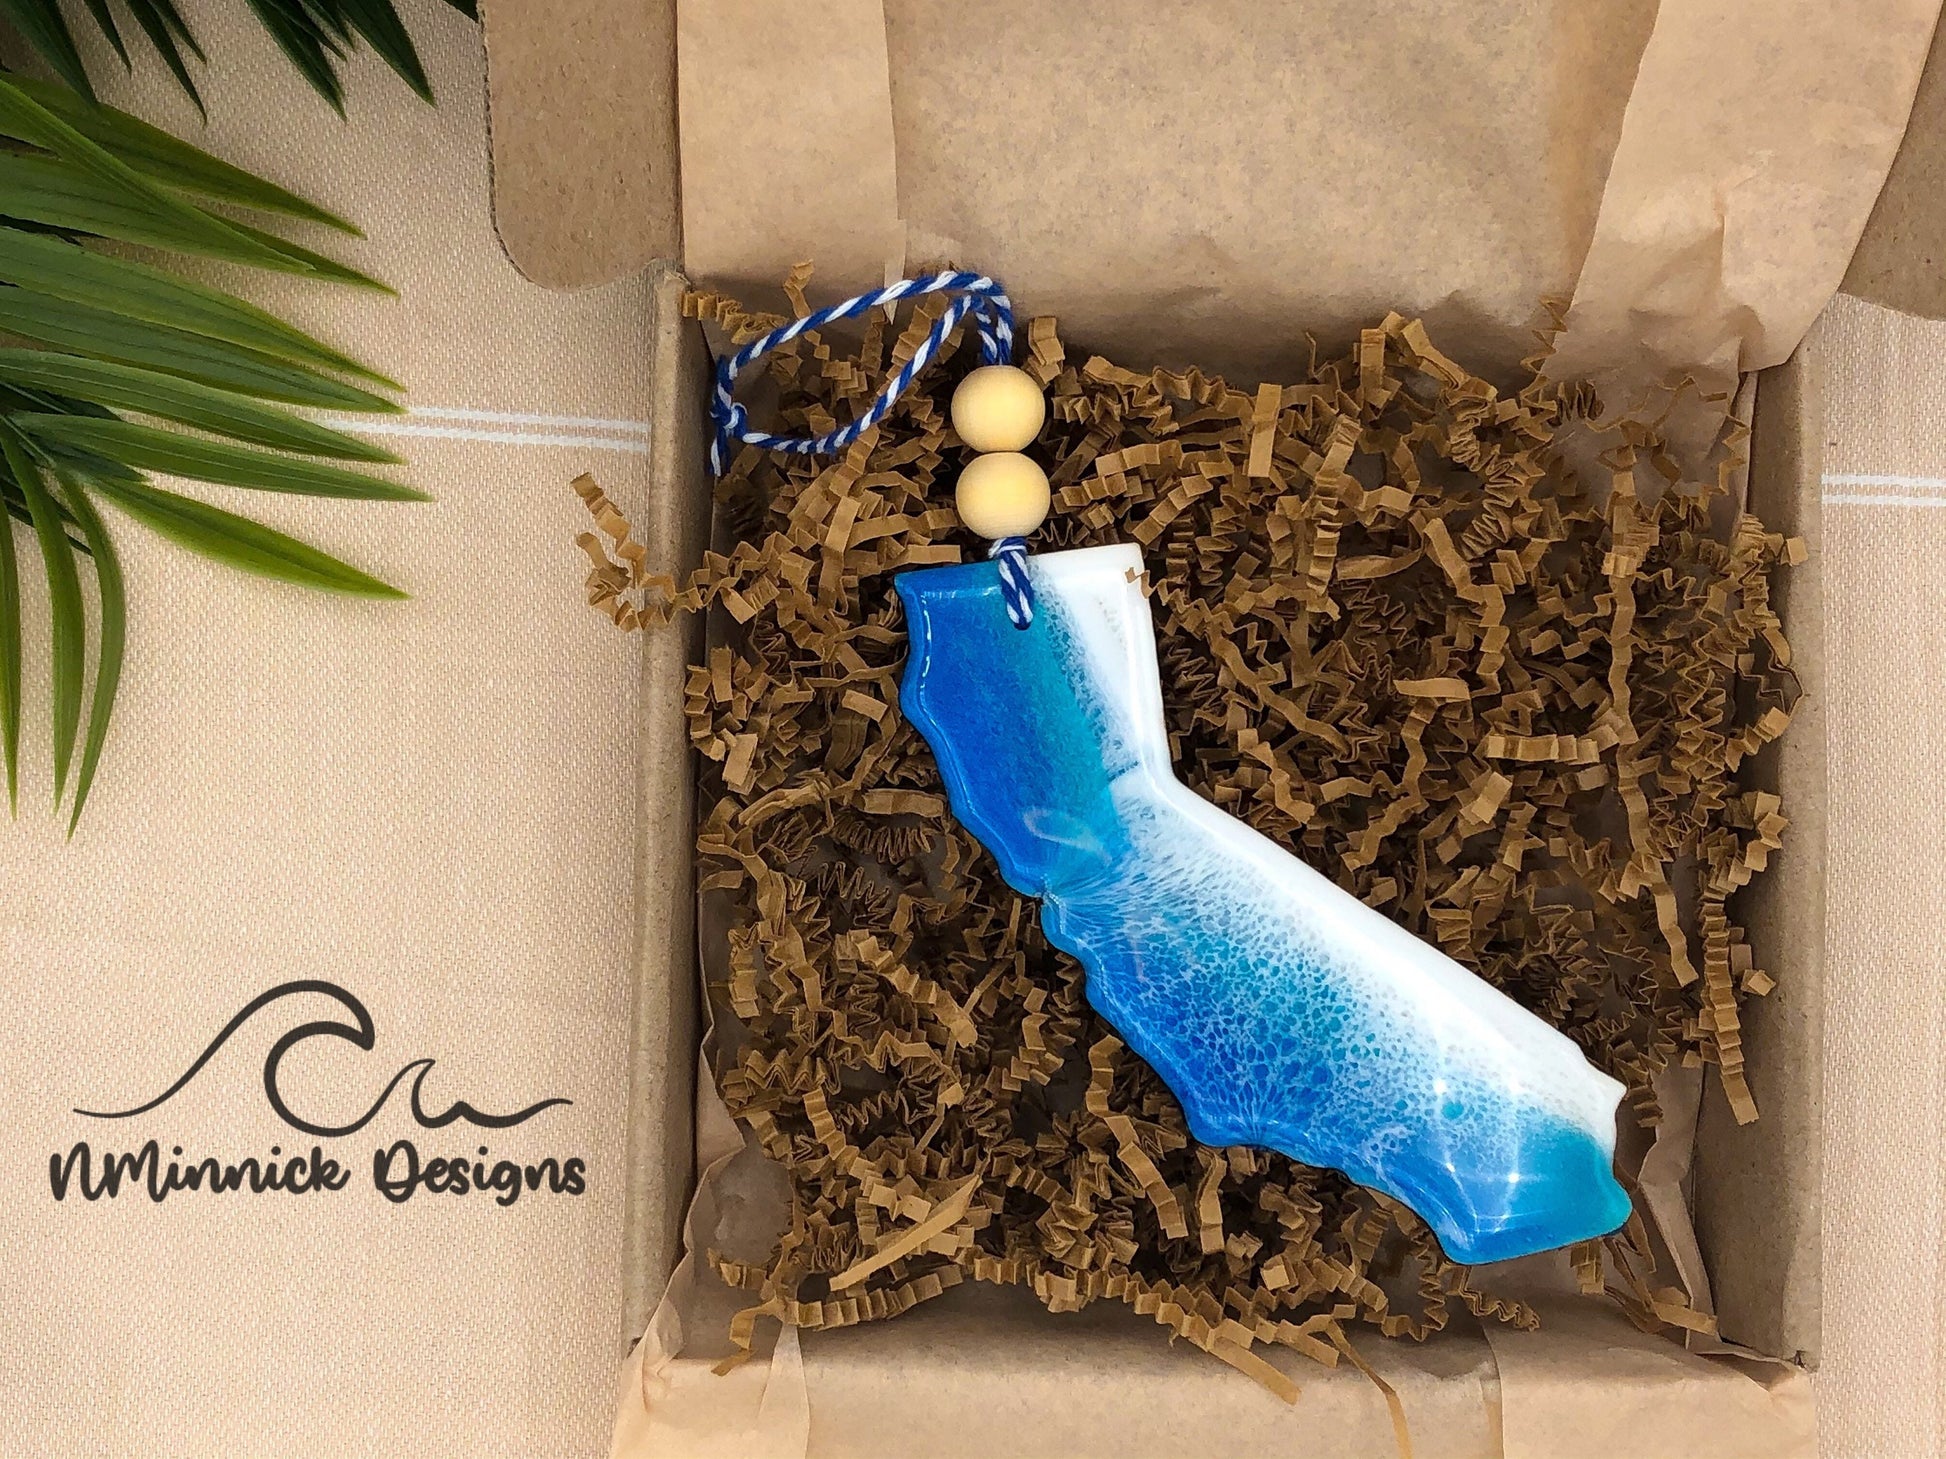 4 to 4.5 inch california shaped ocean resin ornament in dark blue and okinawa blue for a one of a kind ocean wave pattern. Finished with bakers twine and two wooden beads and packaged in ecofriendly plastic free materials.